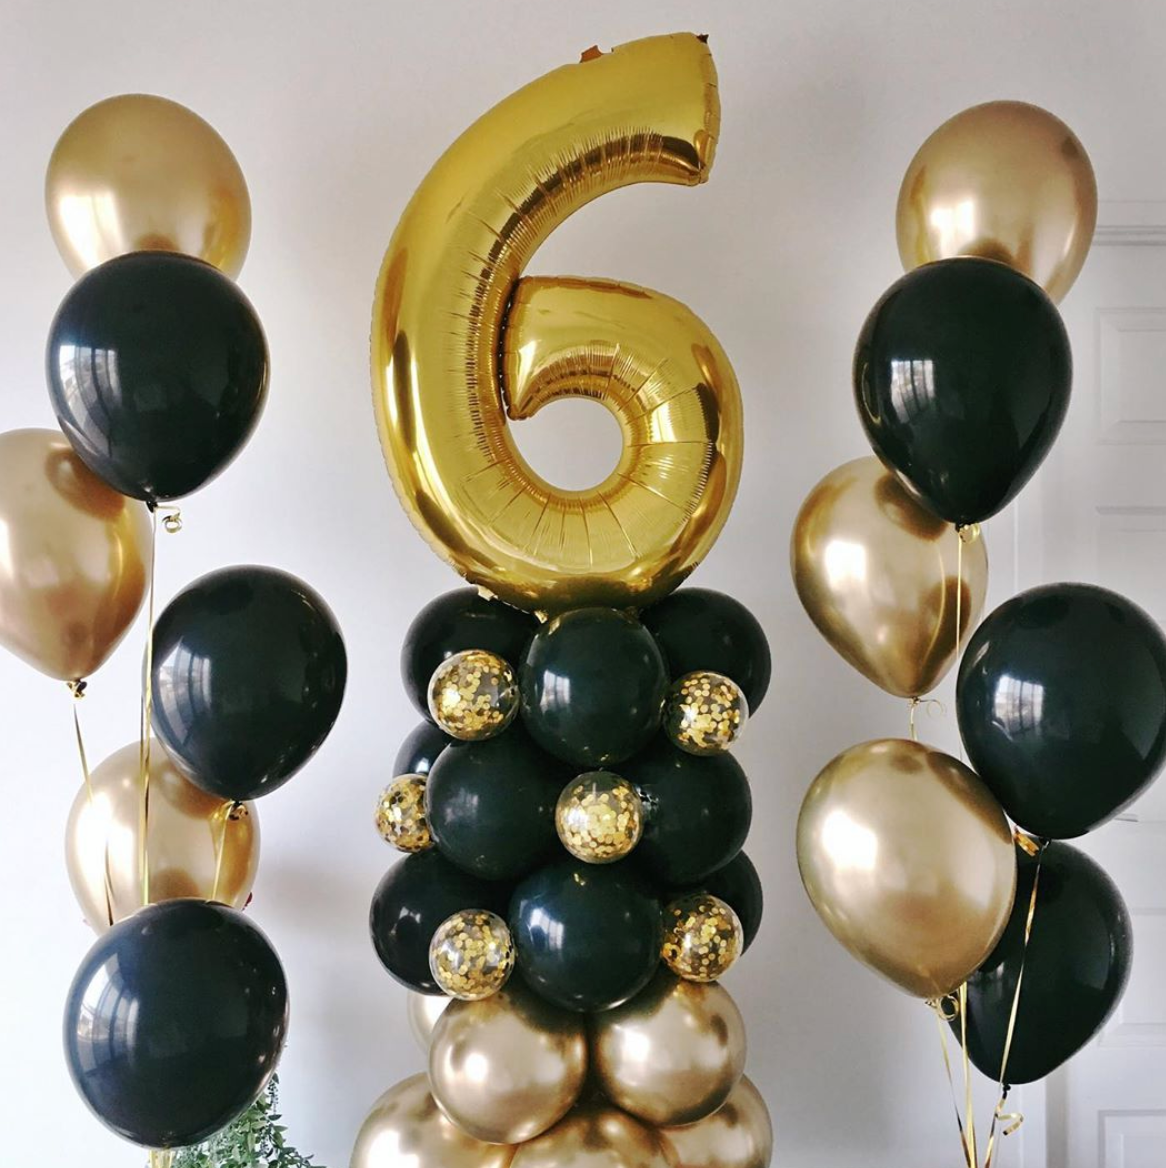 Balloon  Stand With an Age Number - Bickiboo Designs